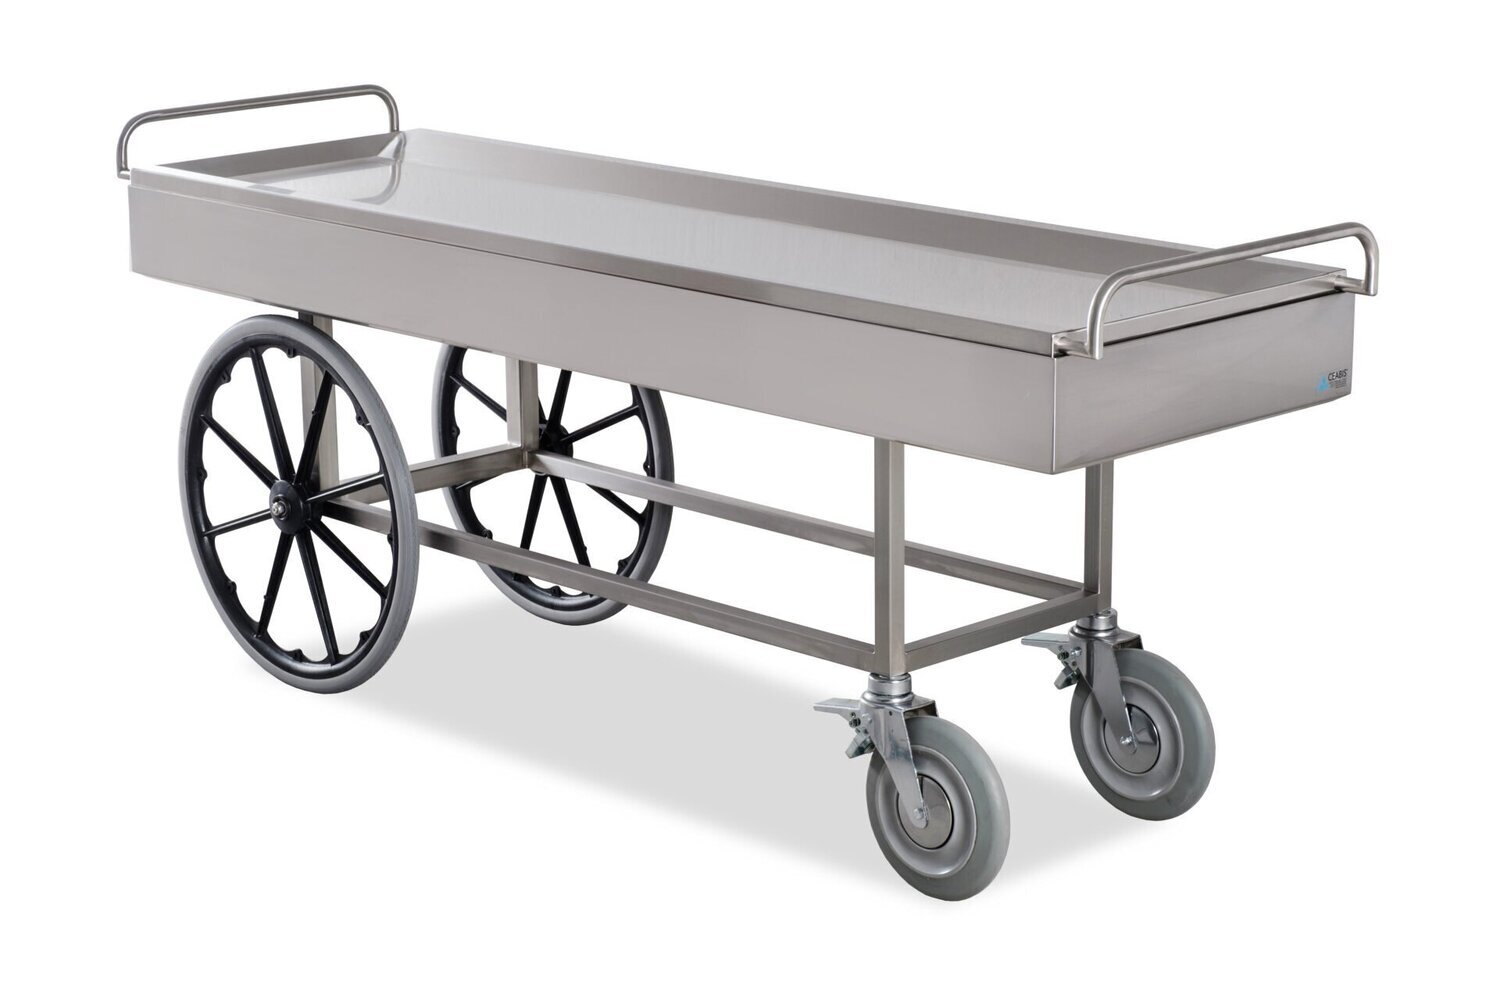 Body trolley for outdoor transportation